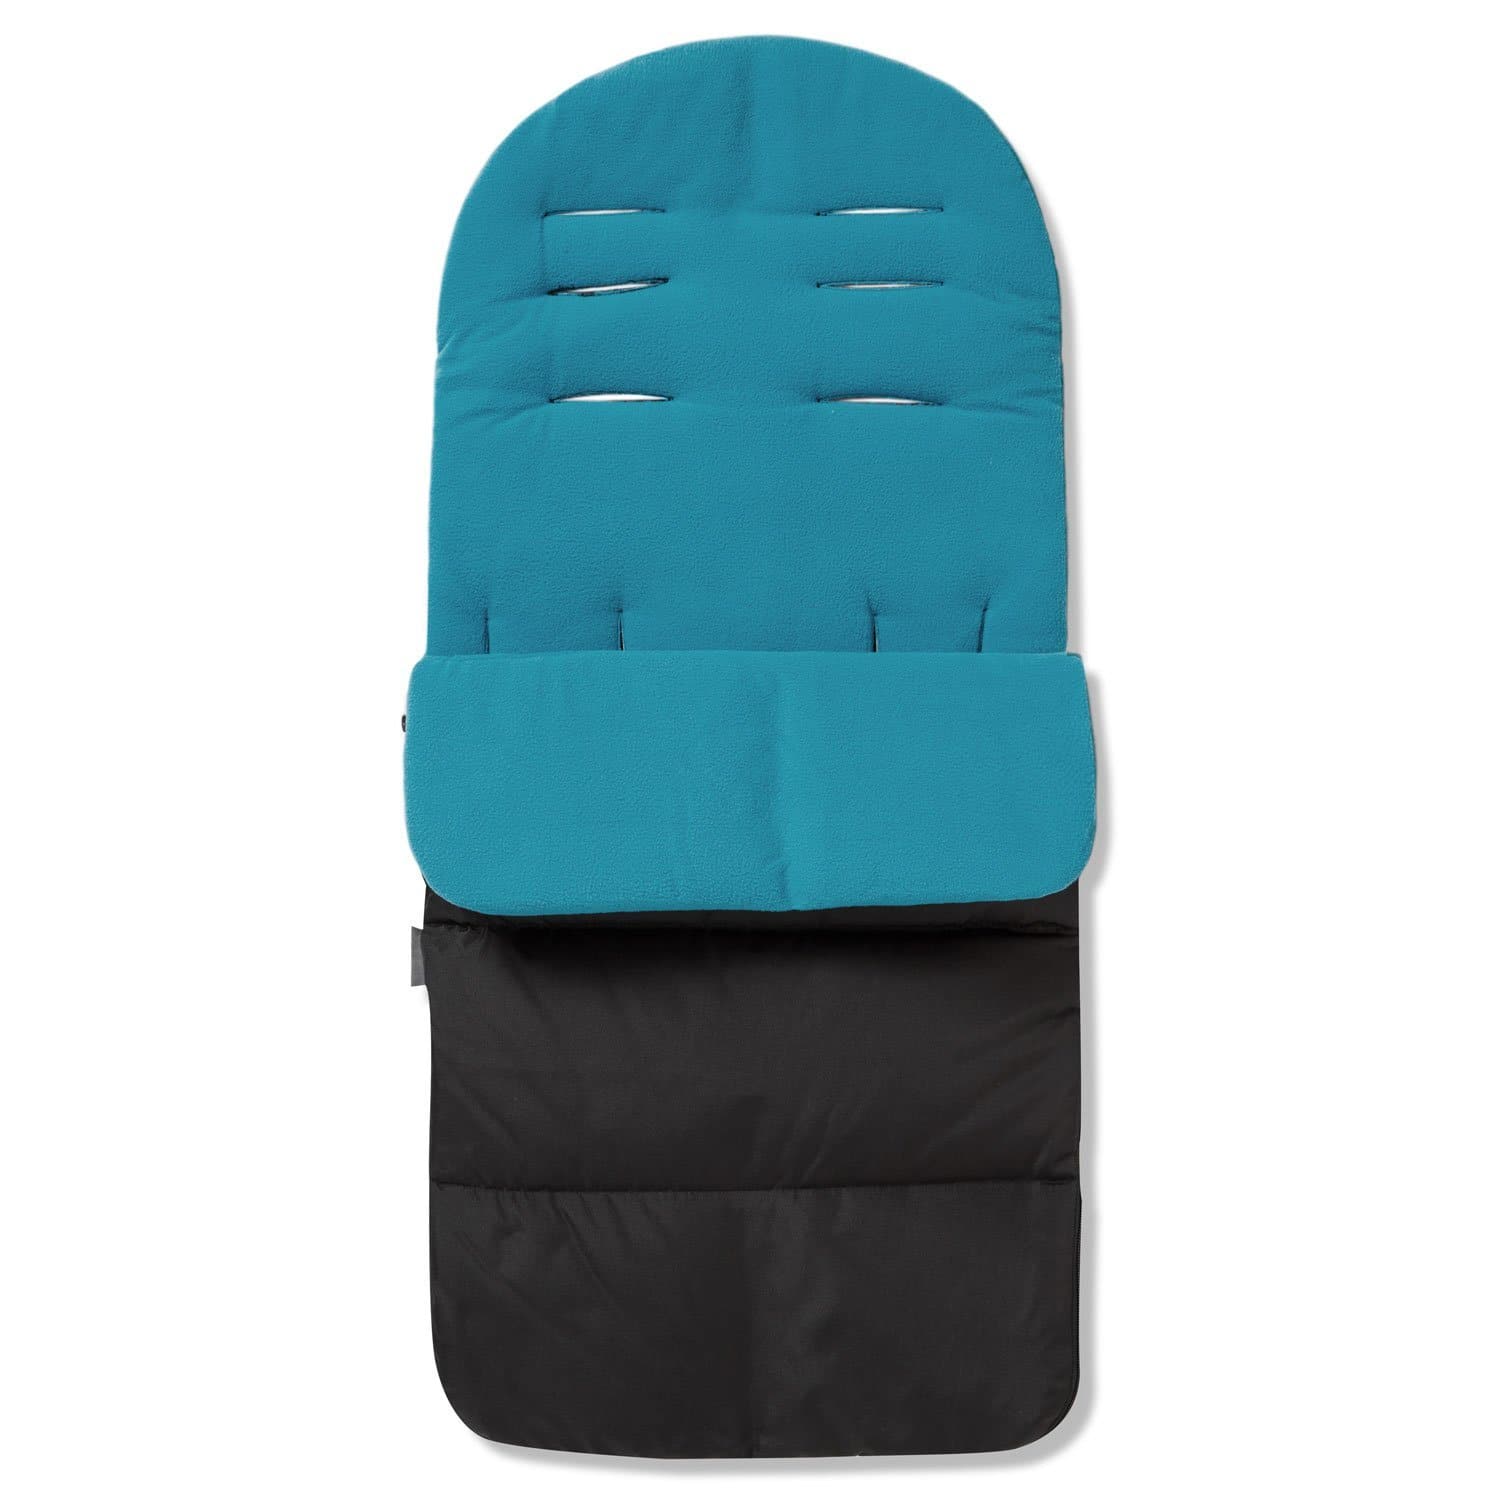 Premium Footmuff / Cosy Toes Compatible with Urban Detour - Ocean Blue / Fits All Models | For Your Little One